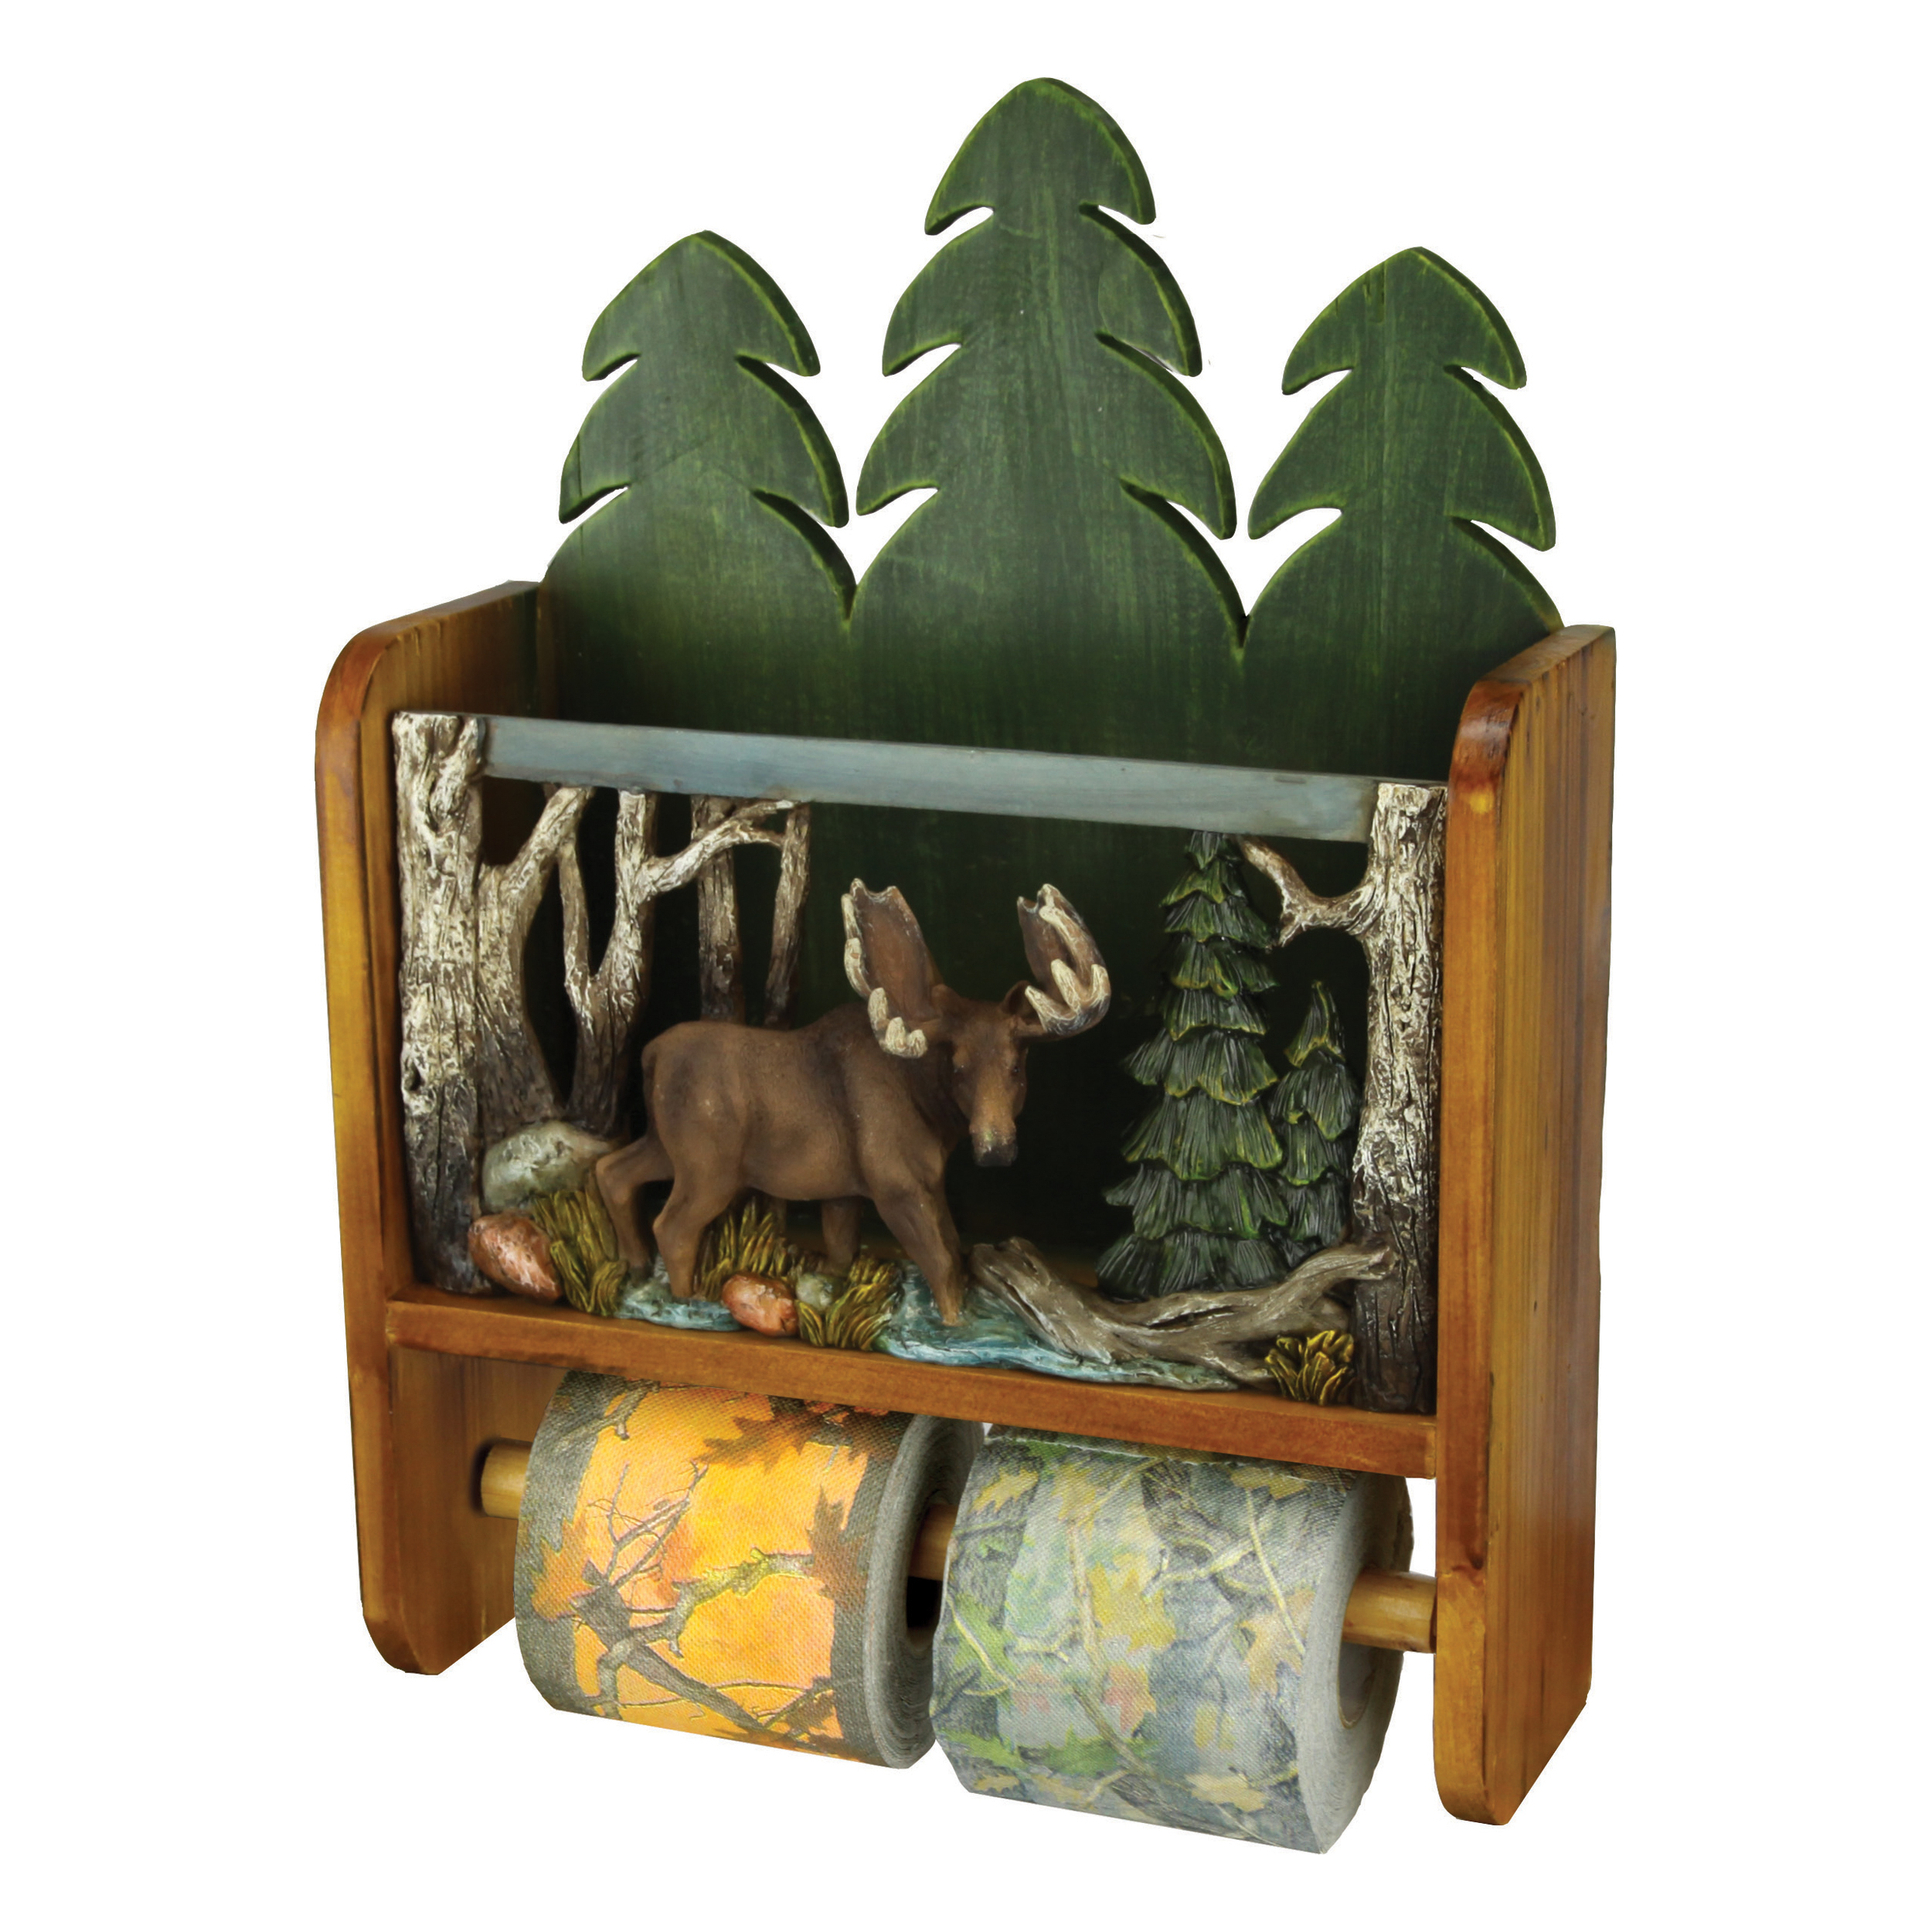 Rivers Edge Products Magazine Rack and Toilet Paper Roll Holder 2 TP Rolls Moose - Picture 1 of 1